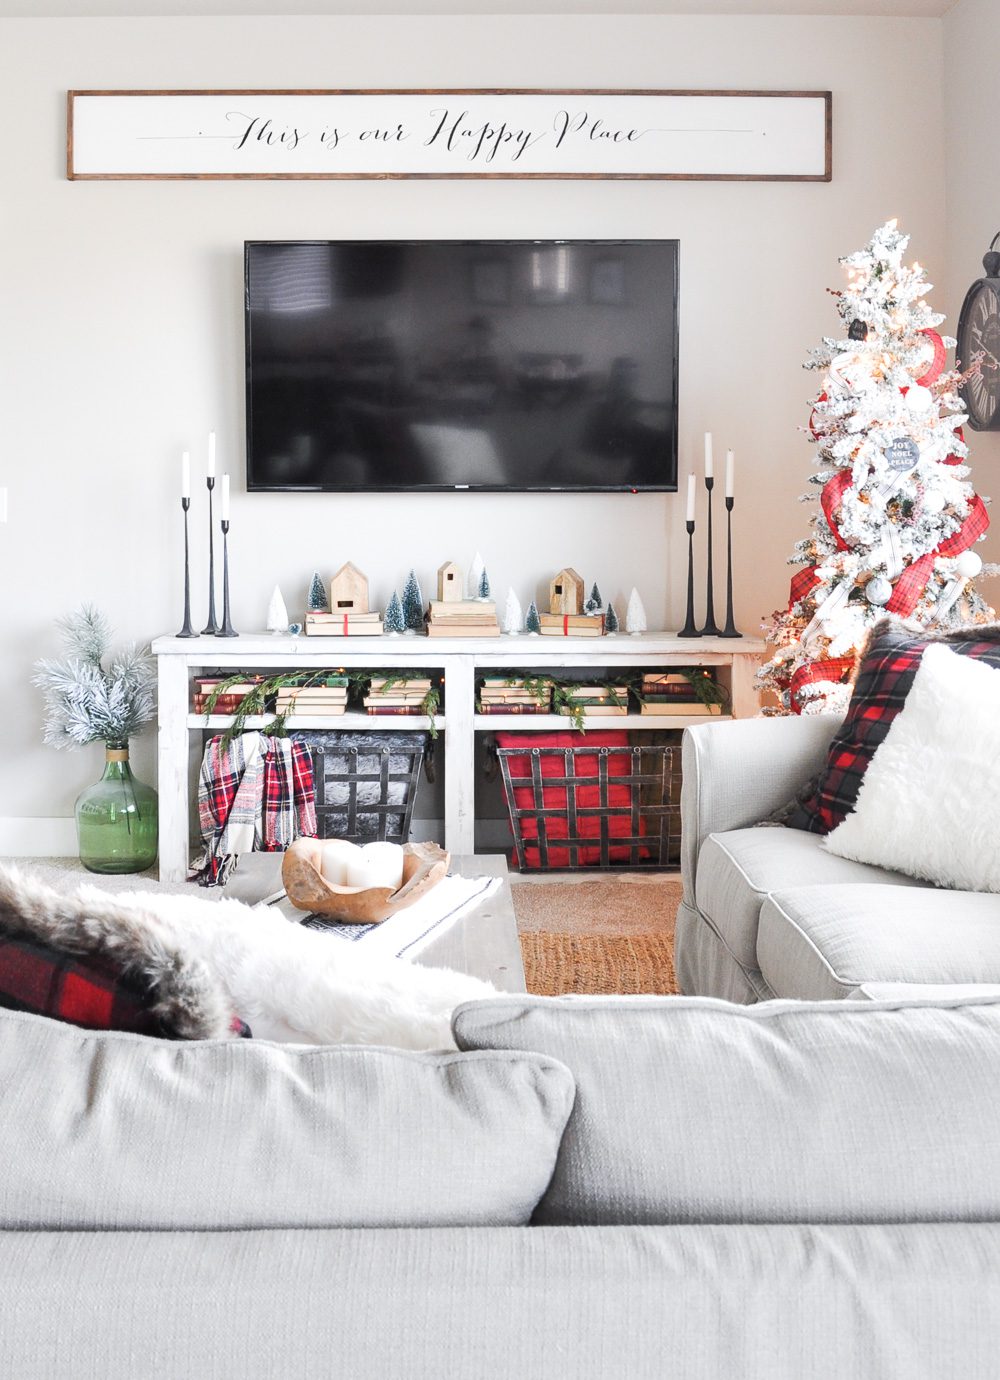 Come take a peek into this Living Room all decorated for Christmas and get a few tips on Christmas Mantel Decor! 